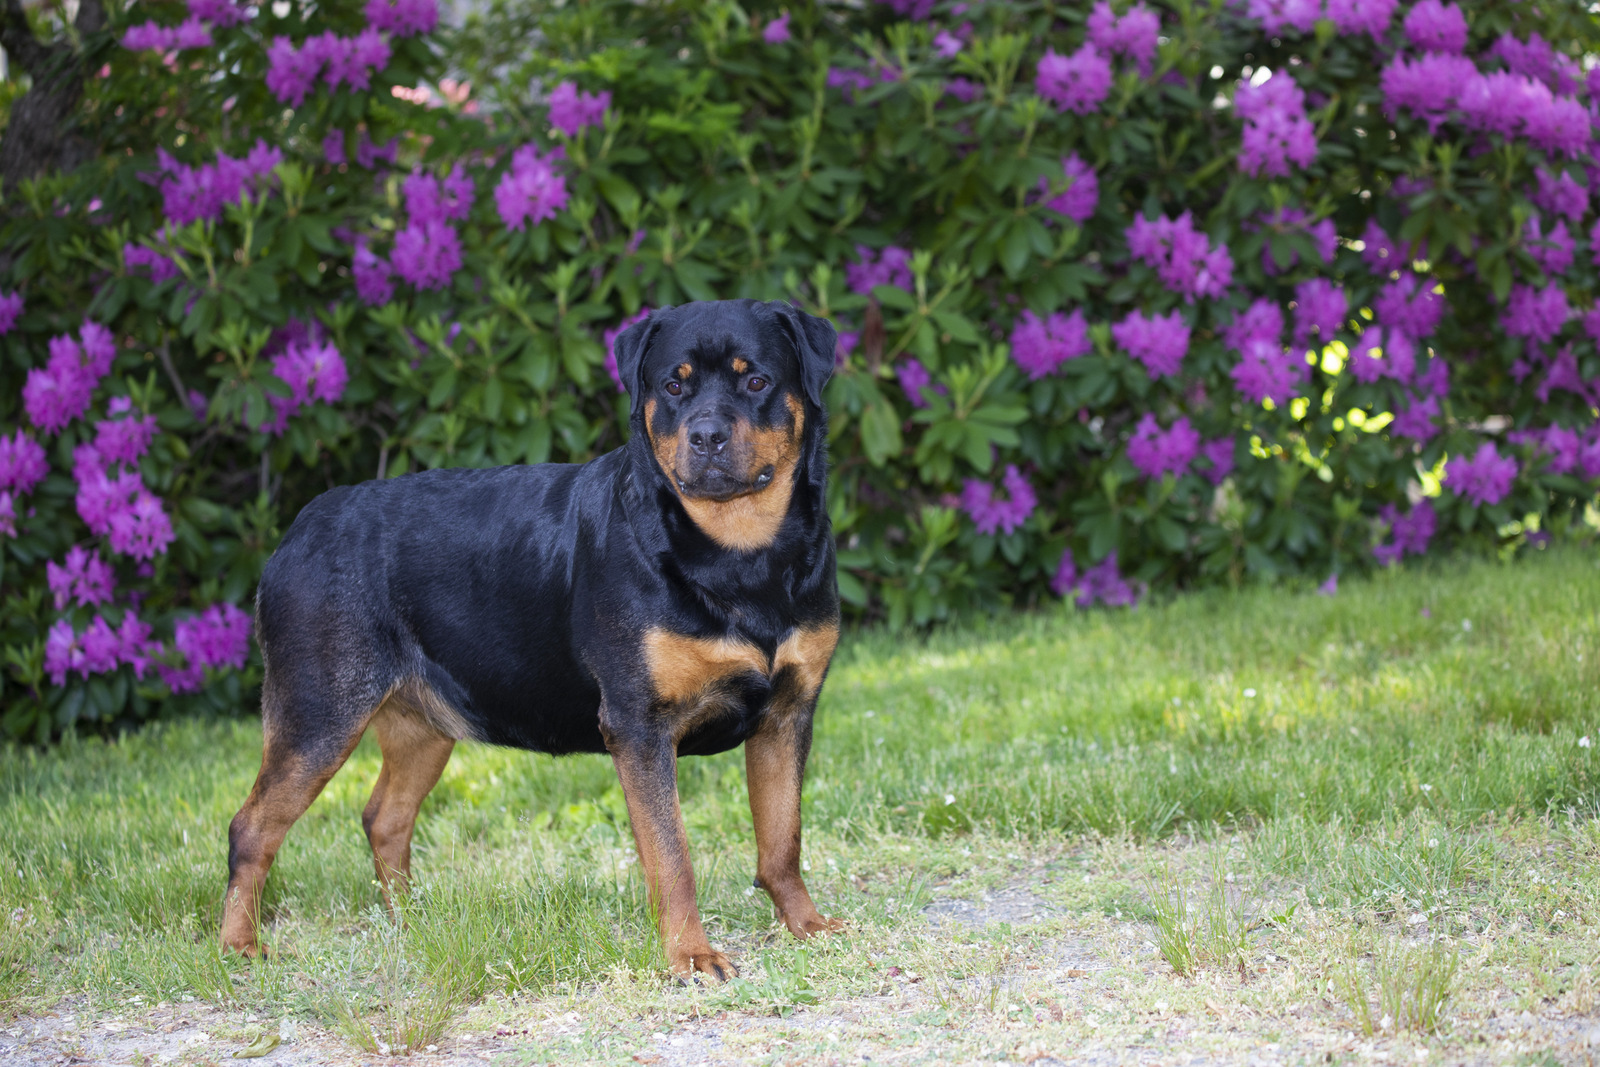 Rottweiler and flowering shrubs, late May; Haddam, Connecticut, USA (CC)